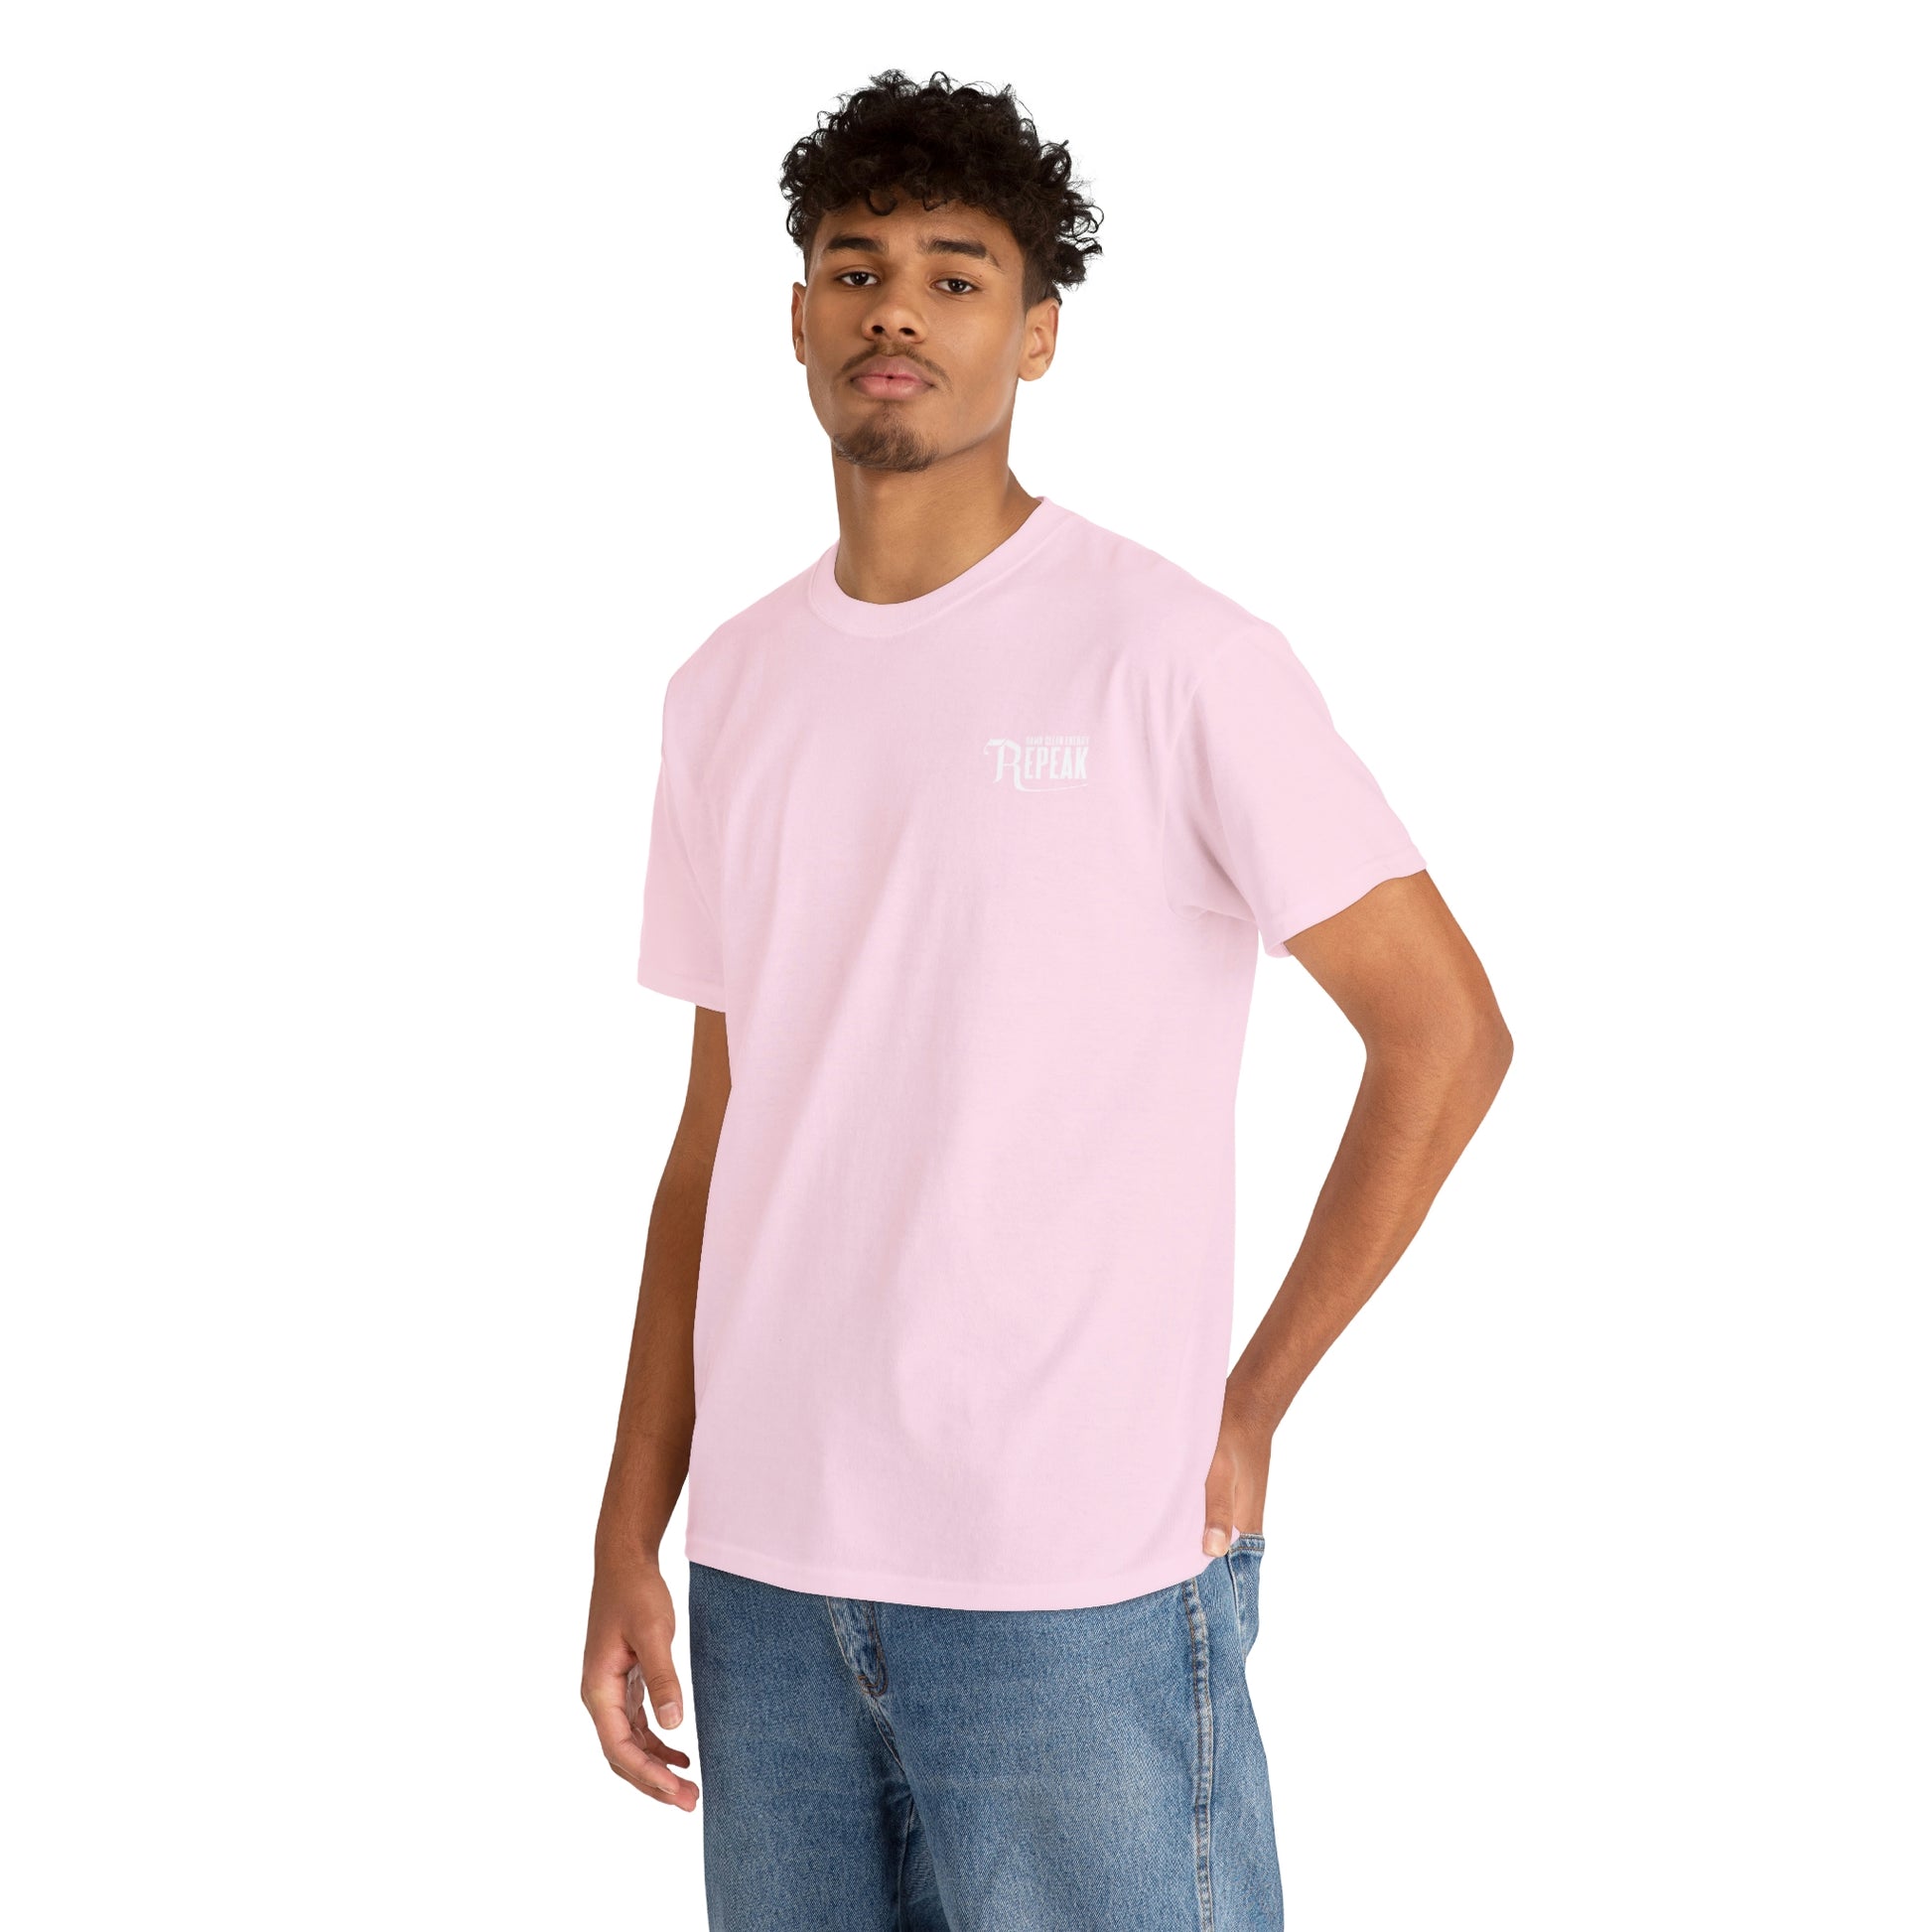 repeak energy drink pink t-shirt, front side with male model